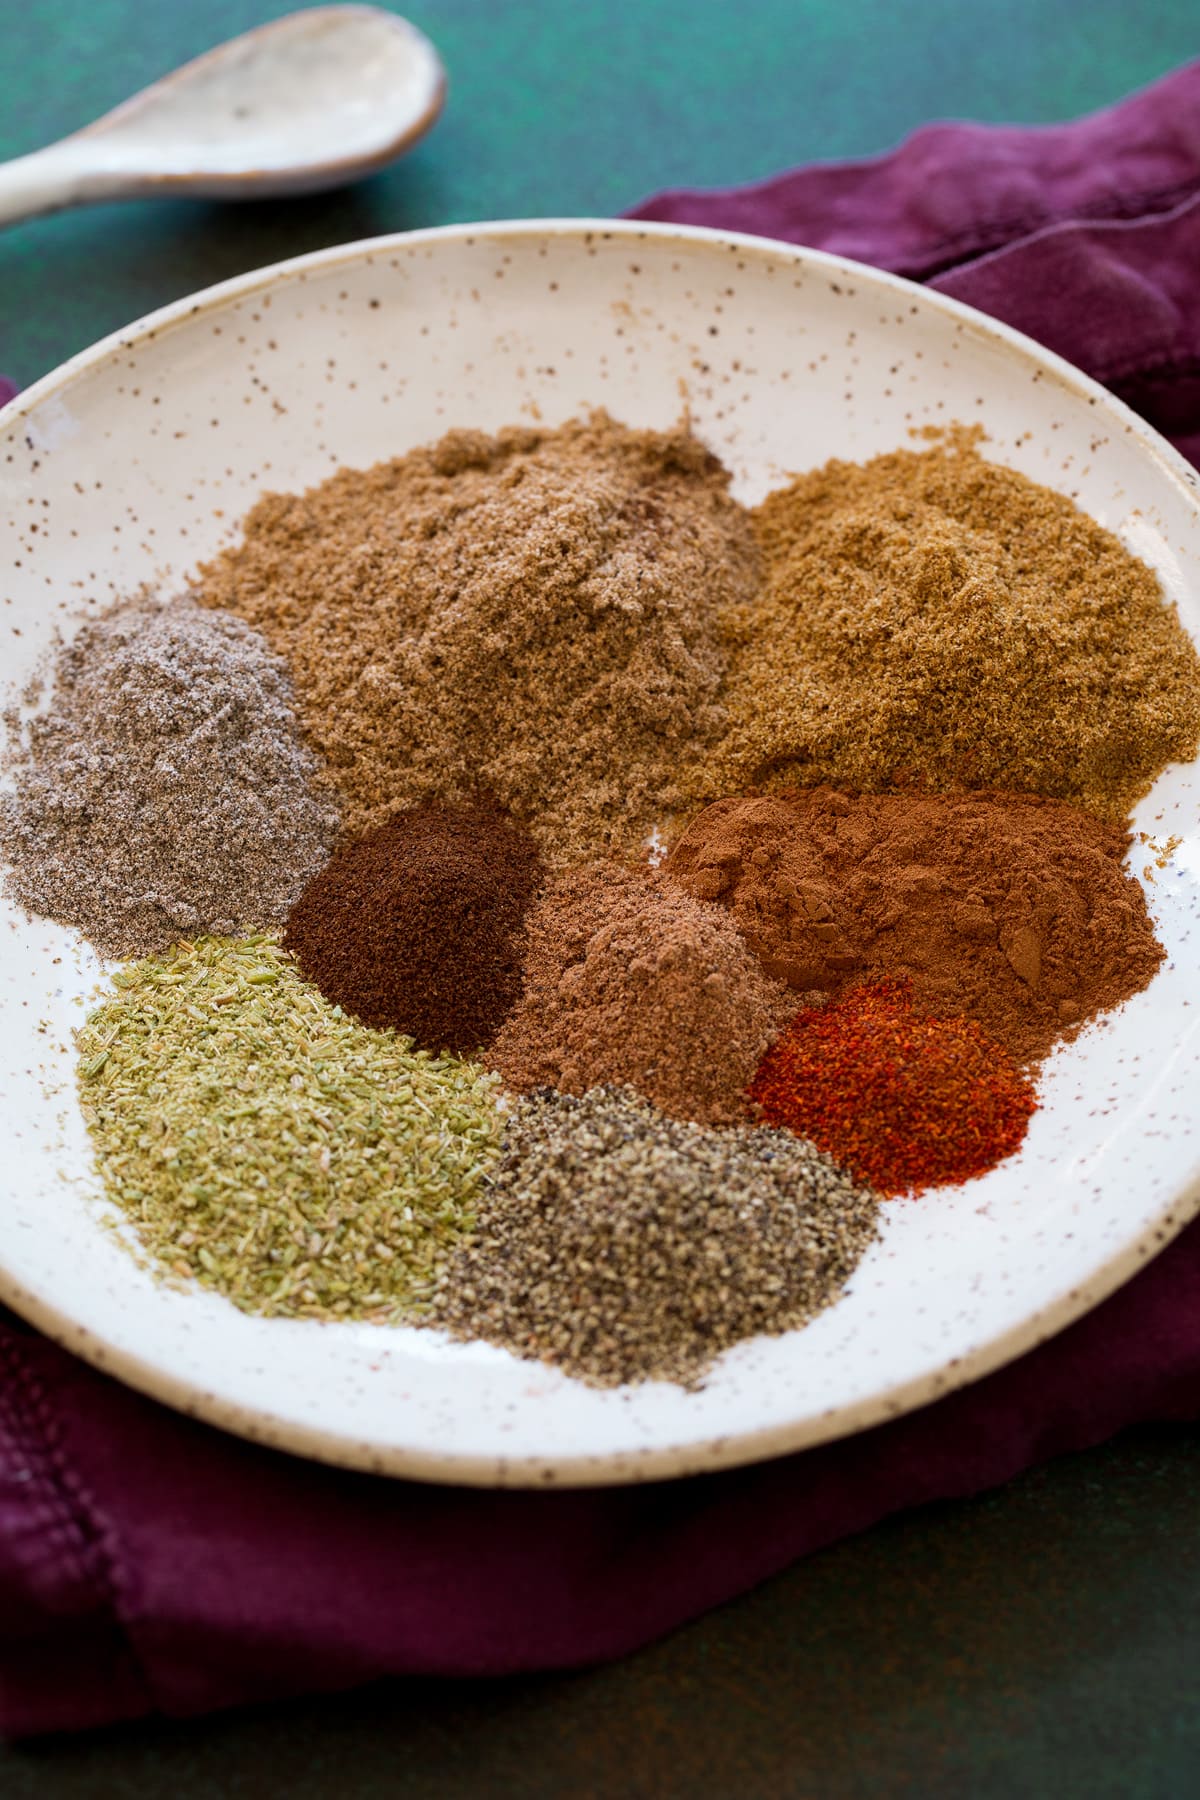 Garam masala pre-ground spices in a bowl before mixing.